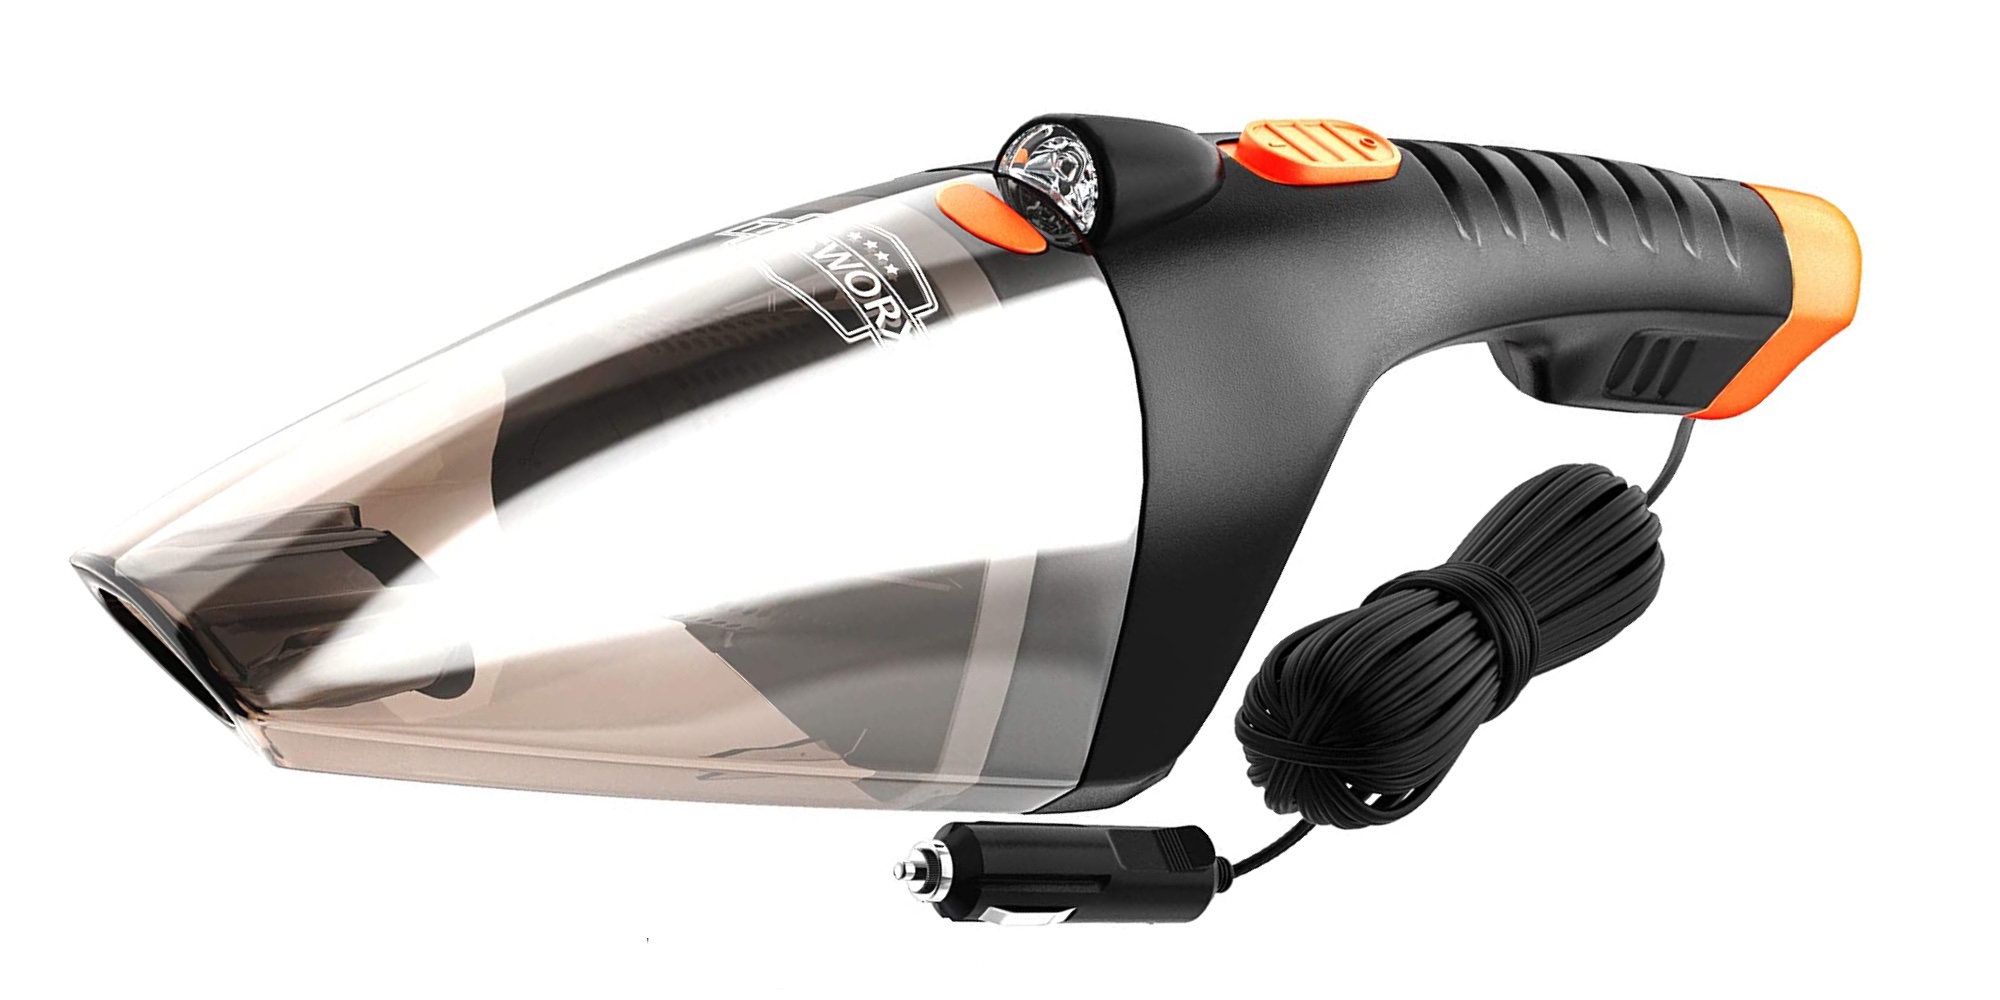 ThisWorx Portable Car Vacuum Cleaner - 110W 12v - 16 Foot Cable - Black 